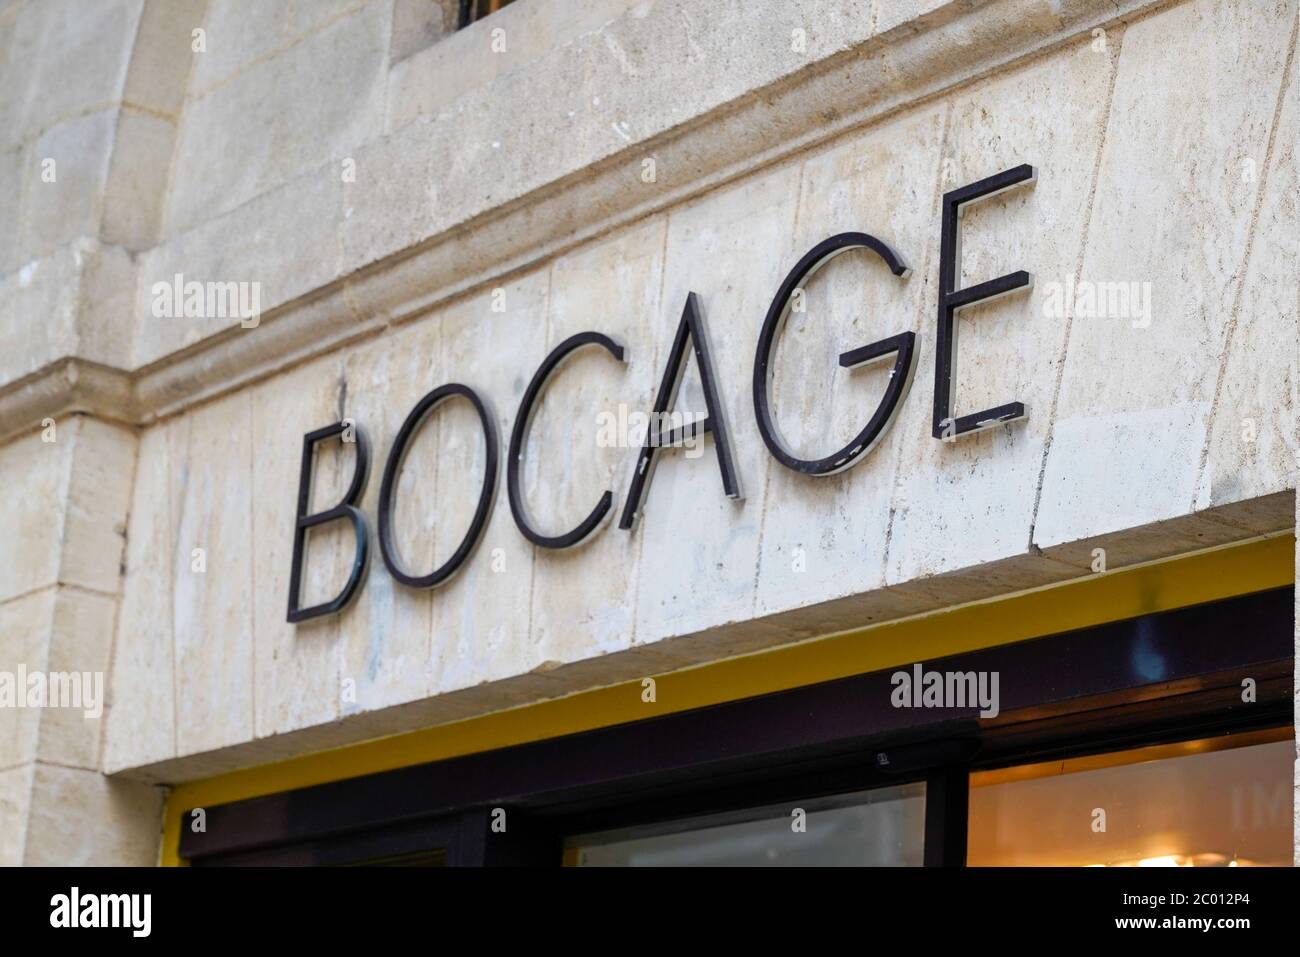 Bordeaux , Aquitaine / France - 06 01 2020 : Bocage logo sign of French  store producing fashionable shoes for men and women Stock Photo - Alamy